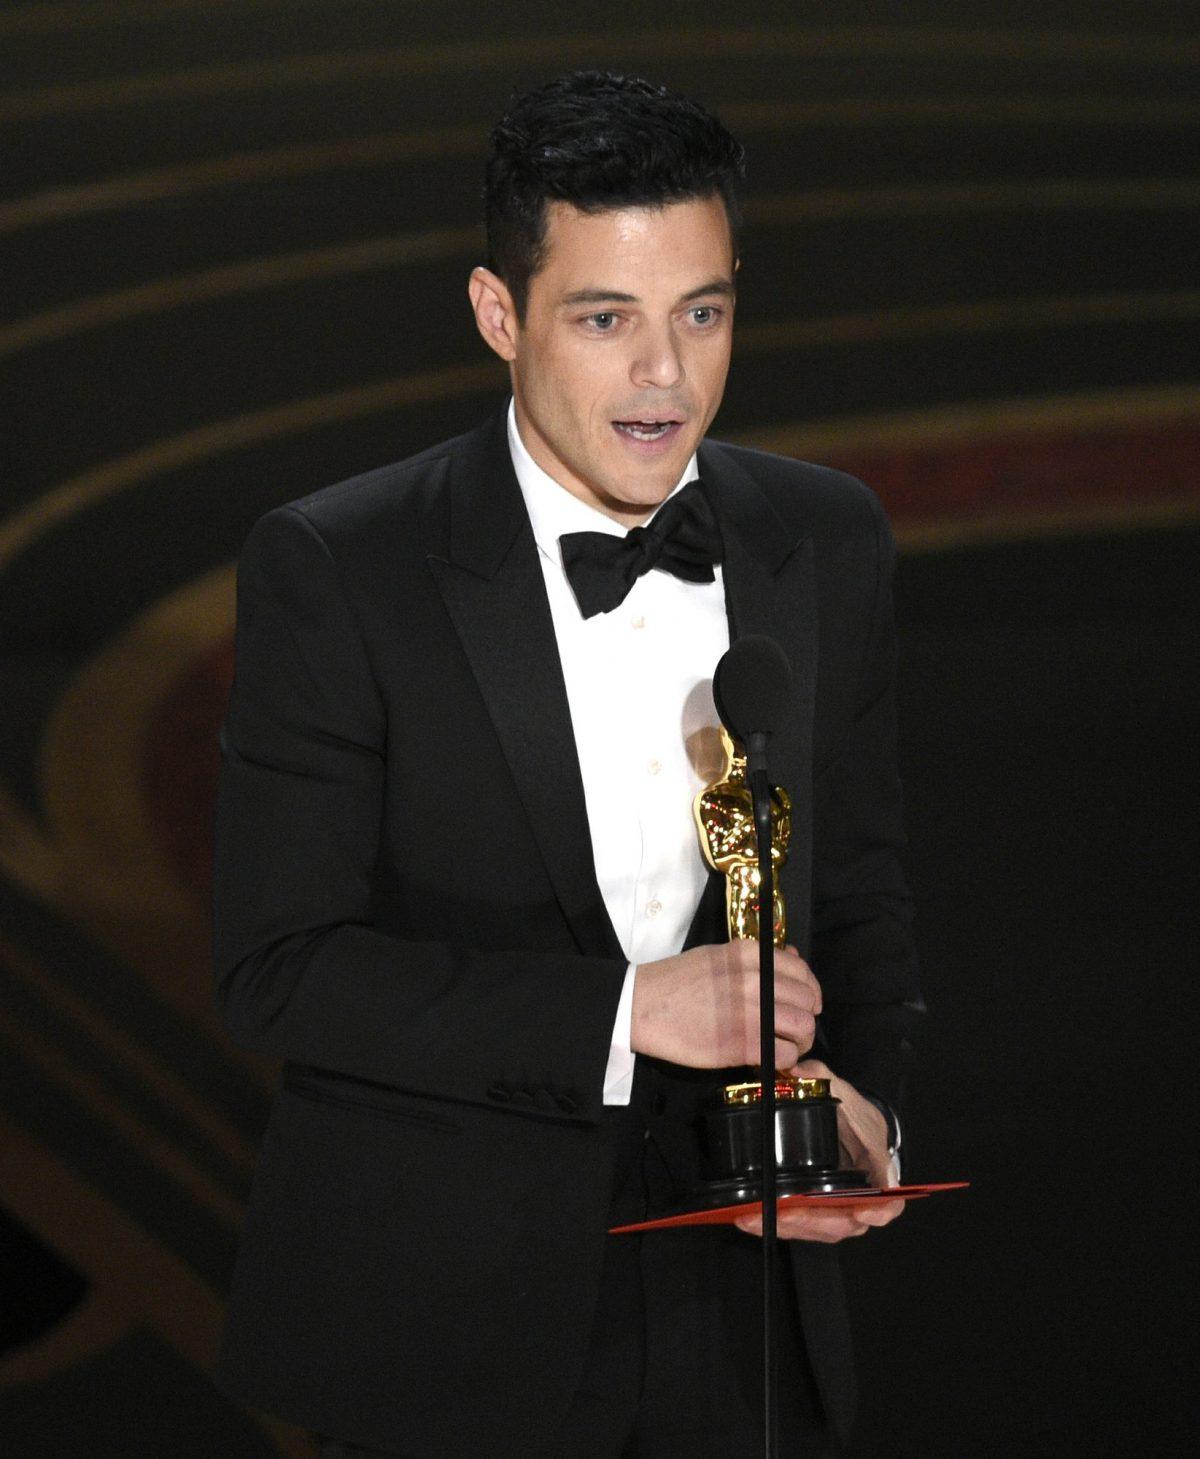 Rami Malek accepts the award for best performance by an actor in a leading role for "Bohemian Rhapsody" at the Oscars, at the Dolby Theatre in Los Angeles, on Feb. 24, 2019, (Chris Pizzello/Invision/AP)